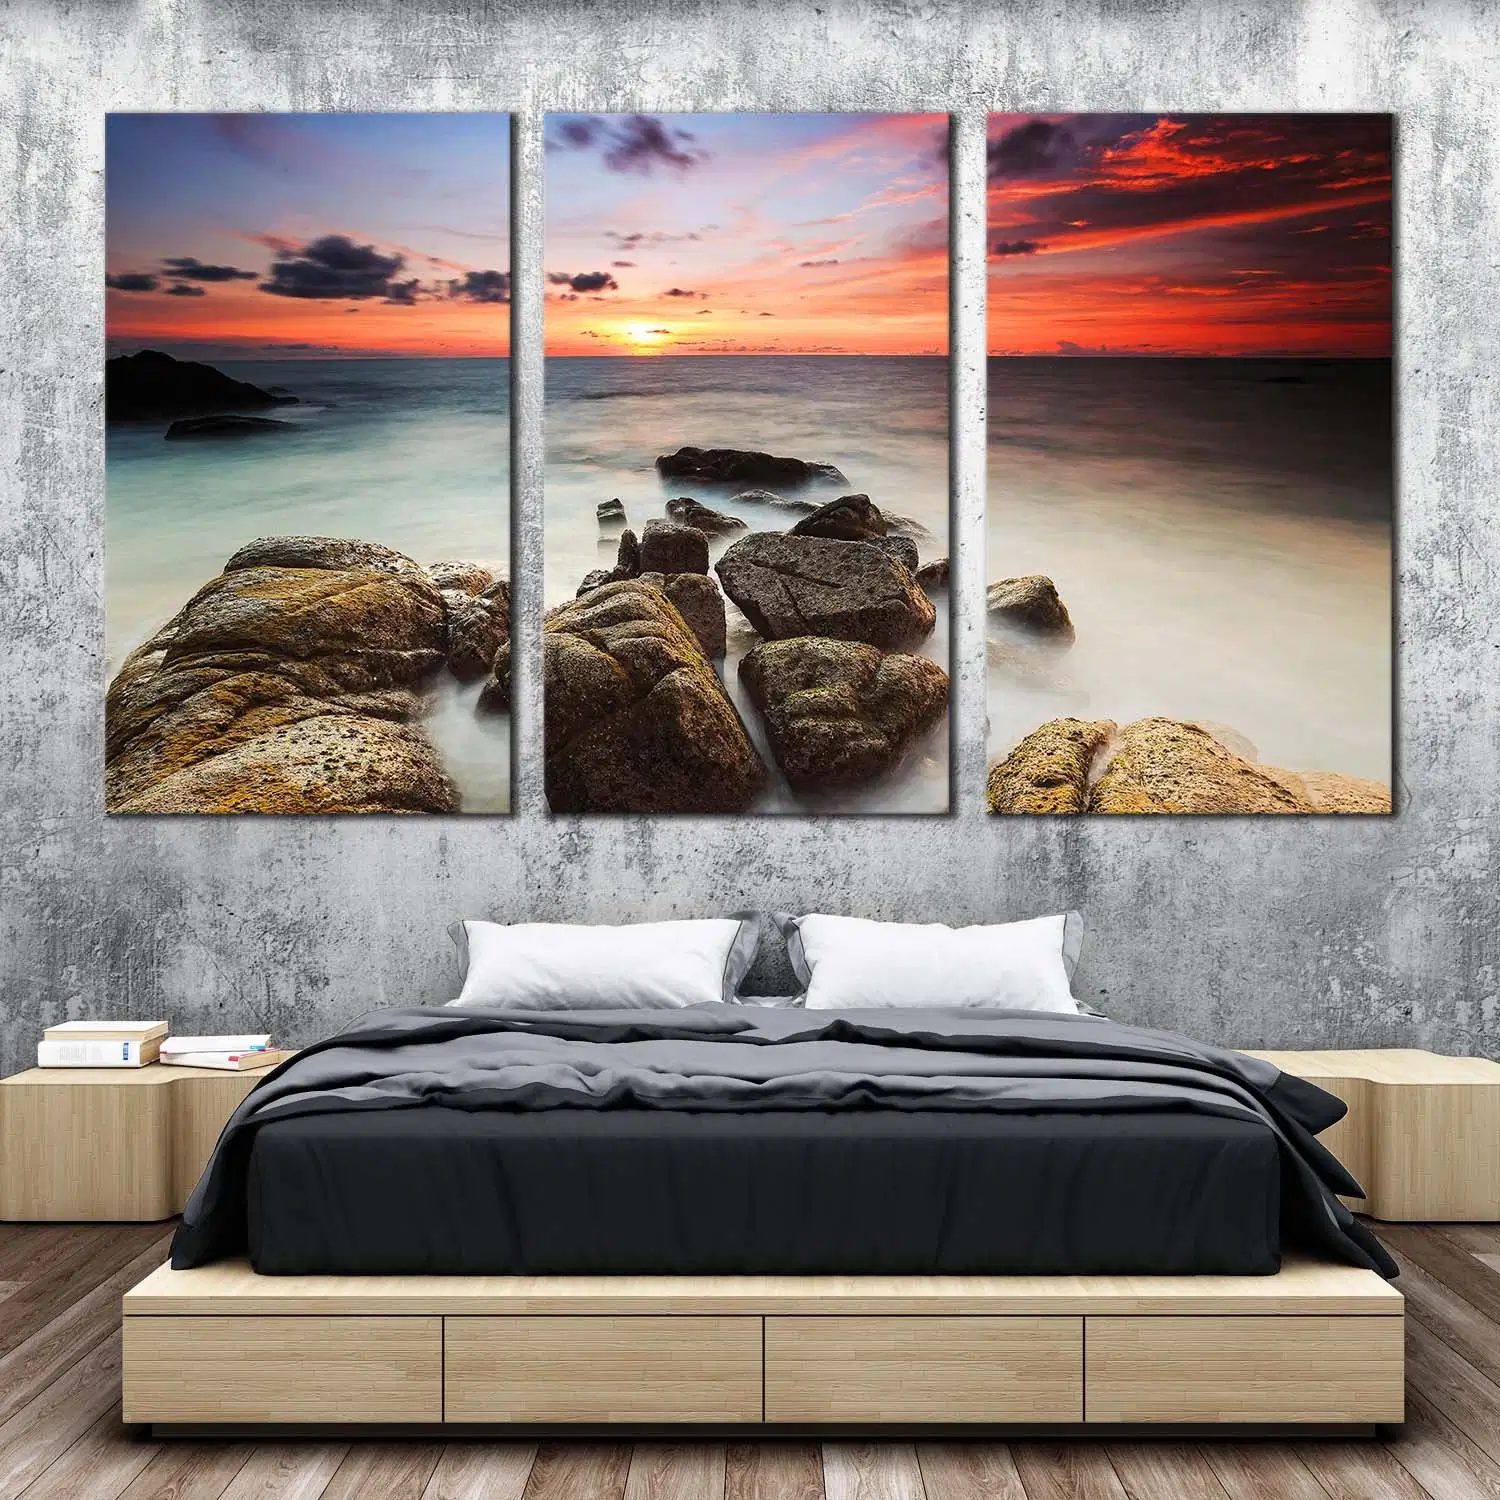 Custom Hot Sell Wall Art Home Decor Photo Picture Canvas Print on Canvas Floating Framed Canvas Painting Canvas Wall Art